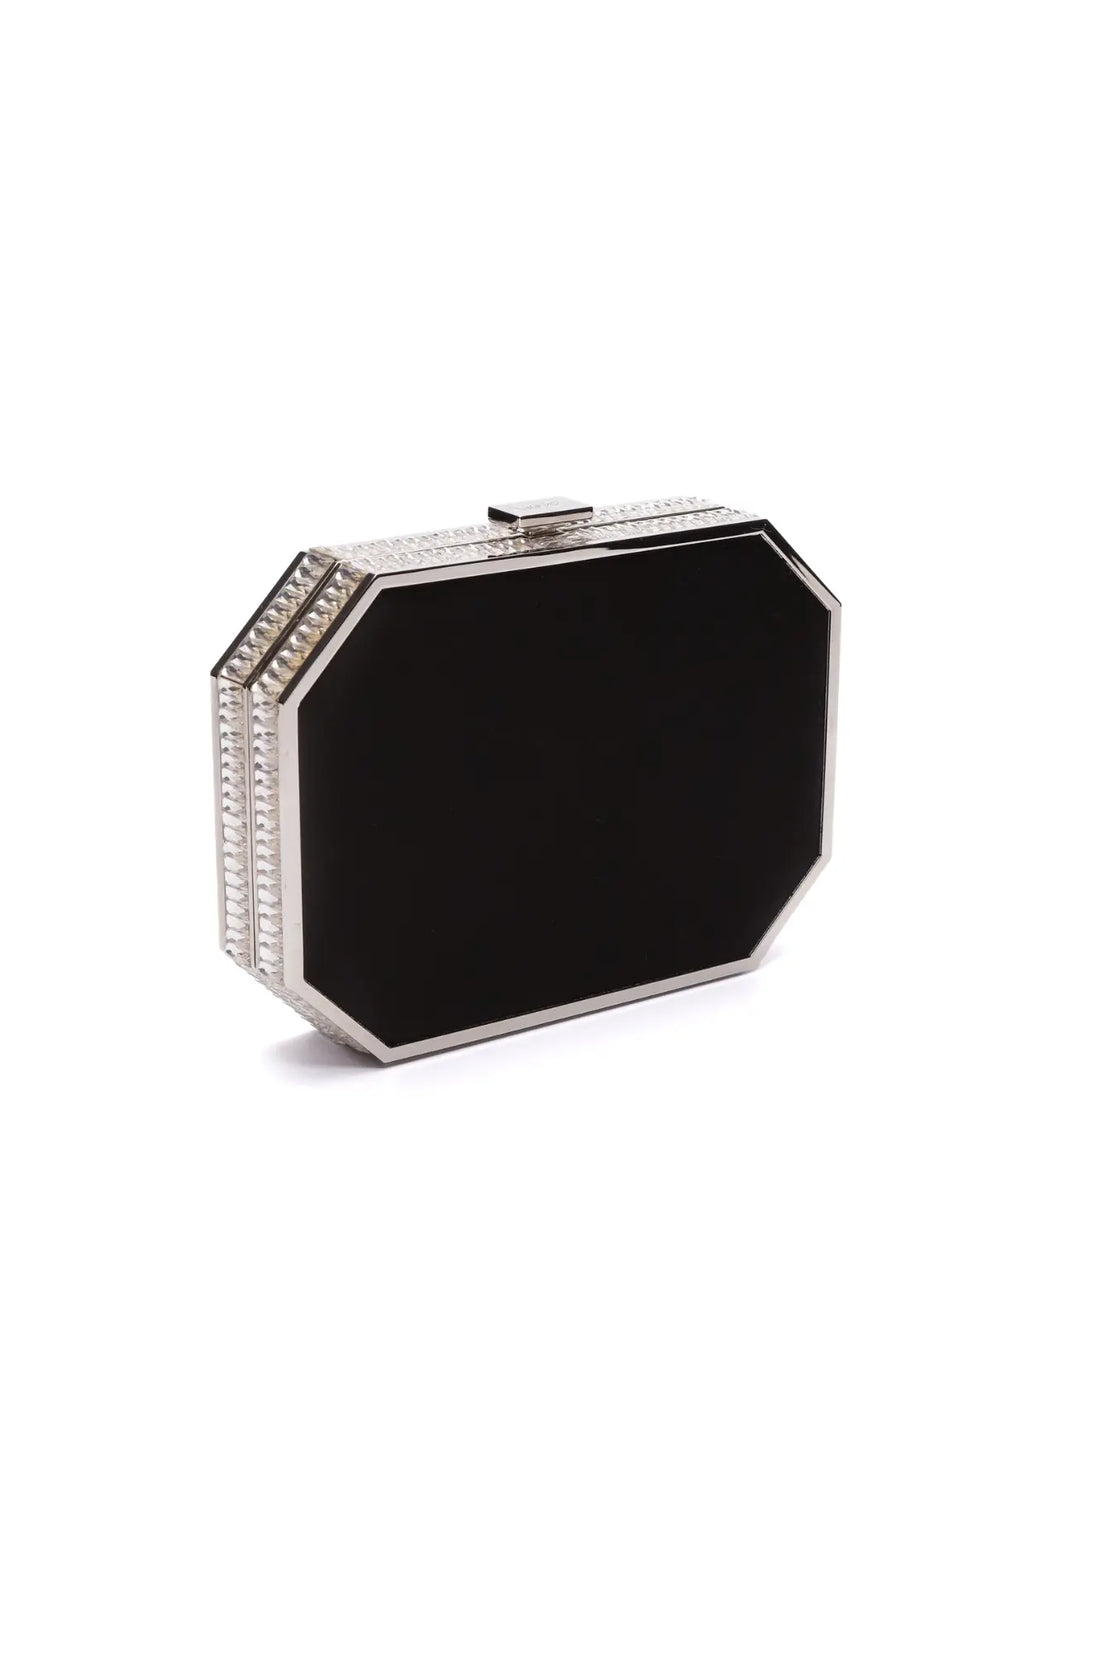 Black satin octagonal Como Clutch x MICAELA with rhinestone embellishments, evoking old Hollywood glamour, from The Bella Rosa Collection.